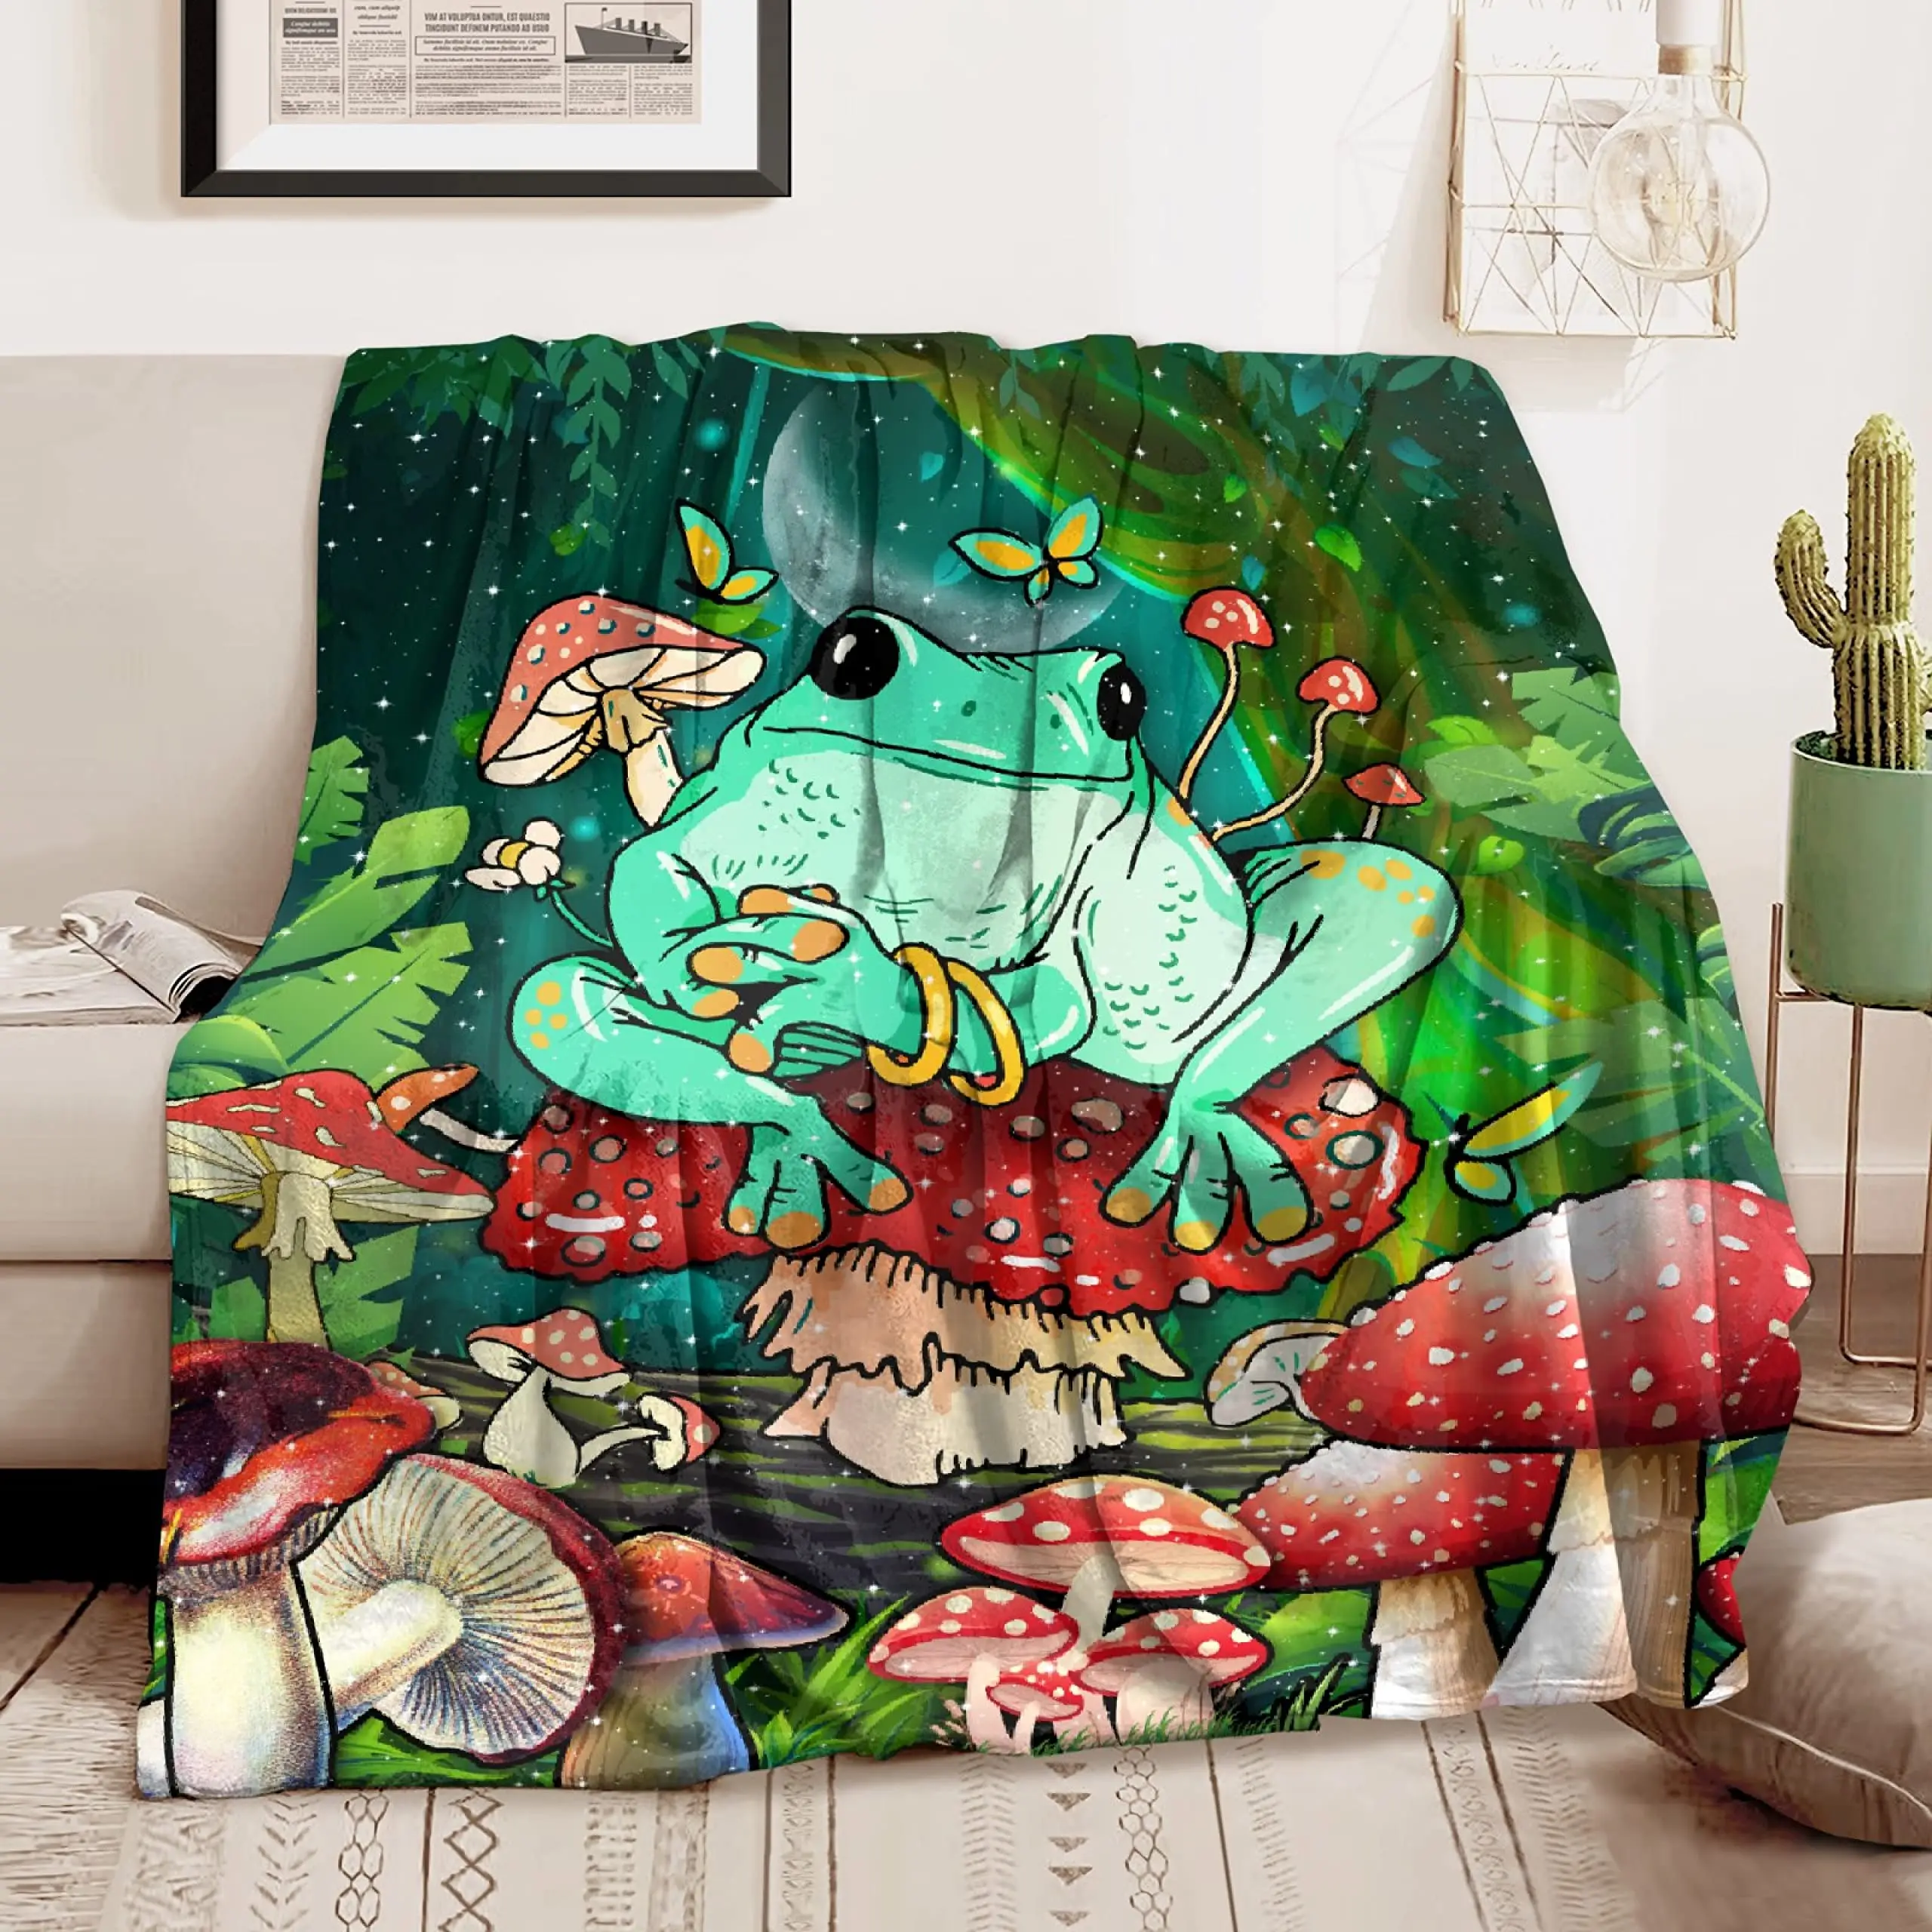 

Soft Throw Blanket Mushroom Frog Comfy Fluffy Quilt for Bed Couch Sofa Living Room Picnic Suitable All Season for Teen Home Gift